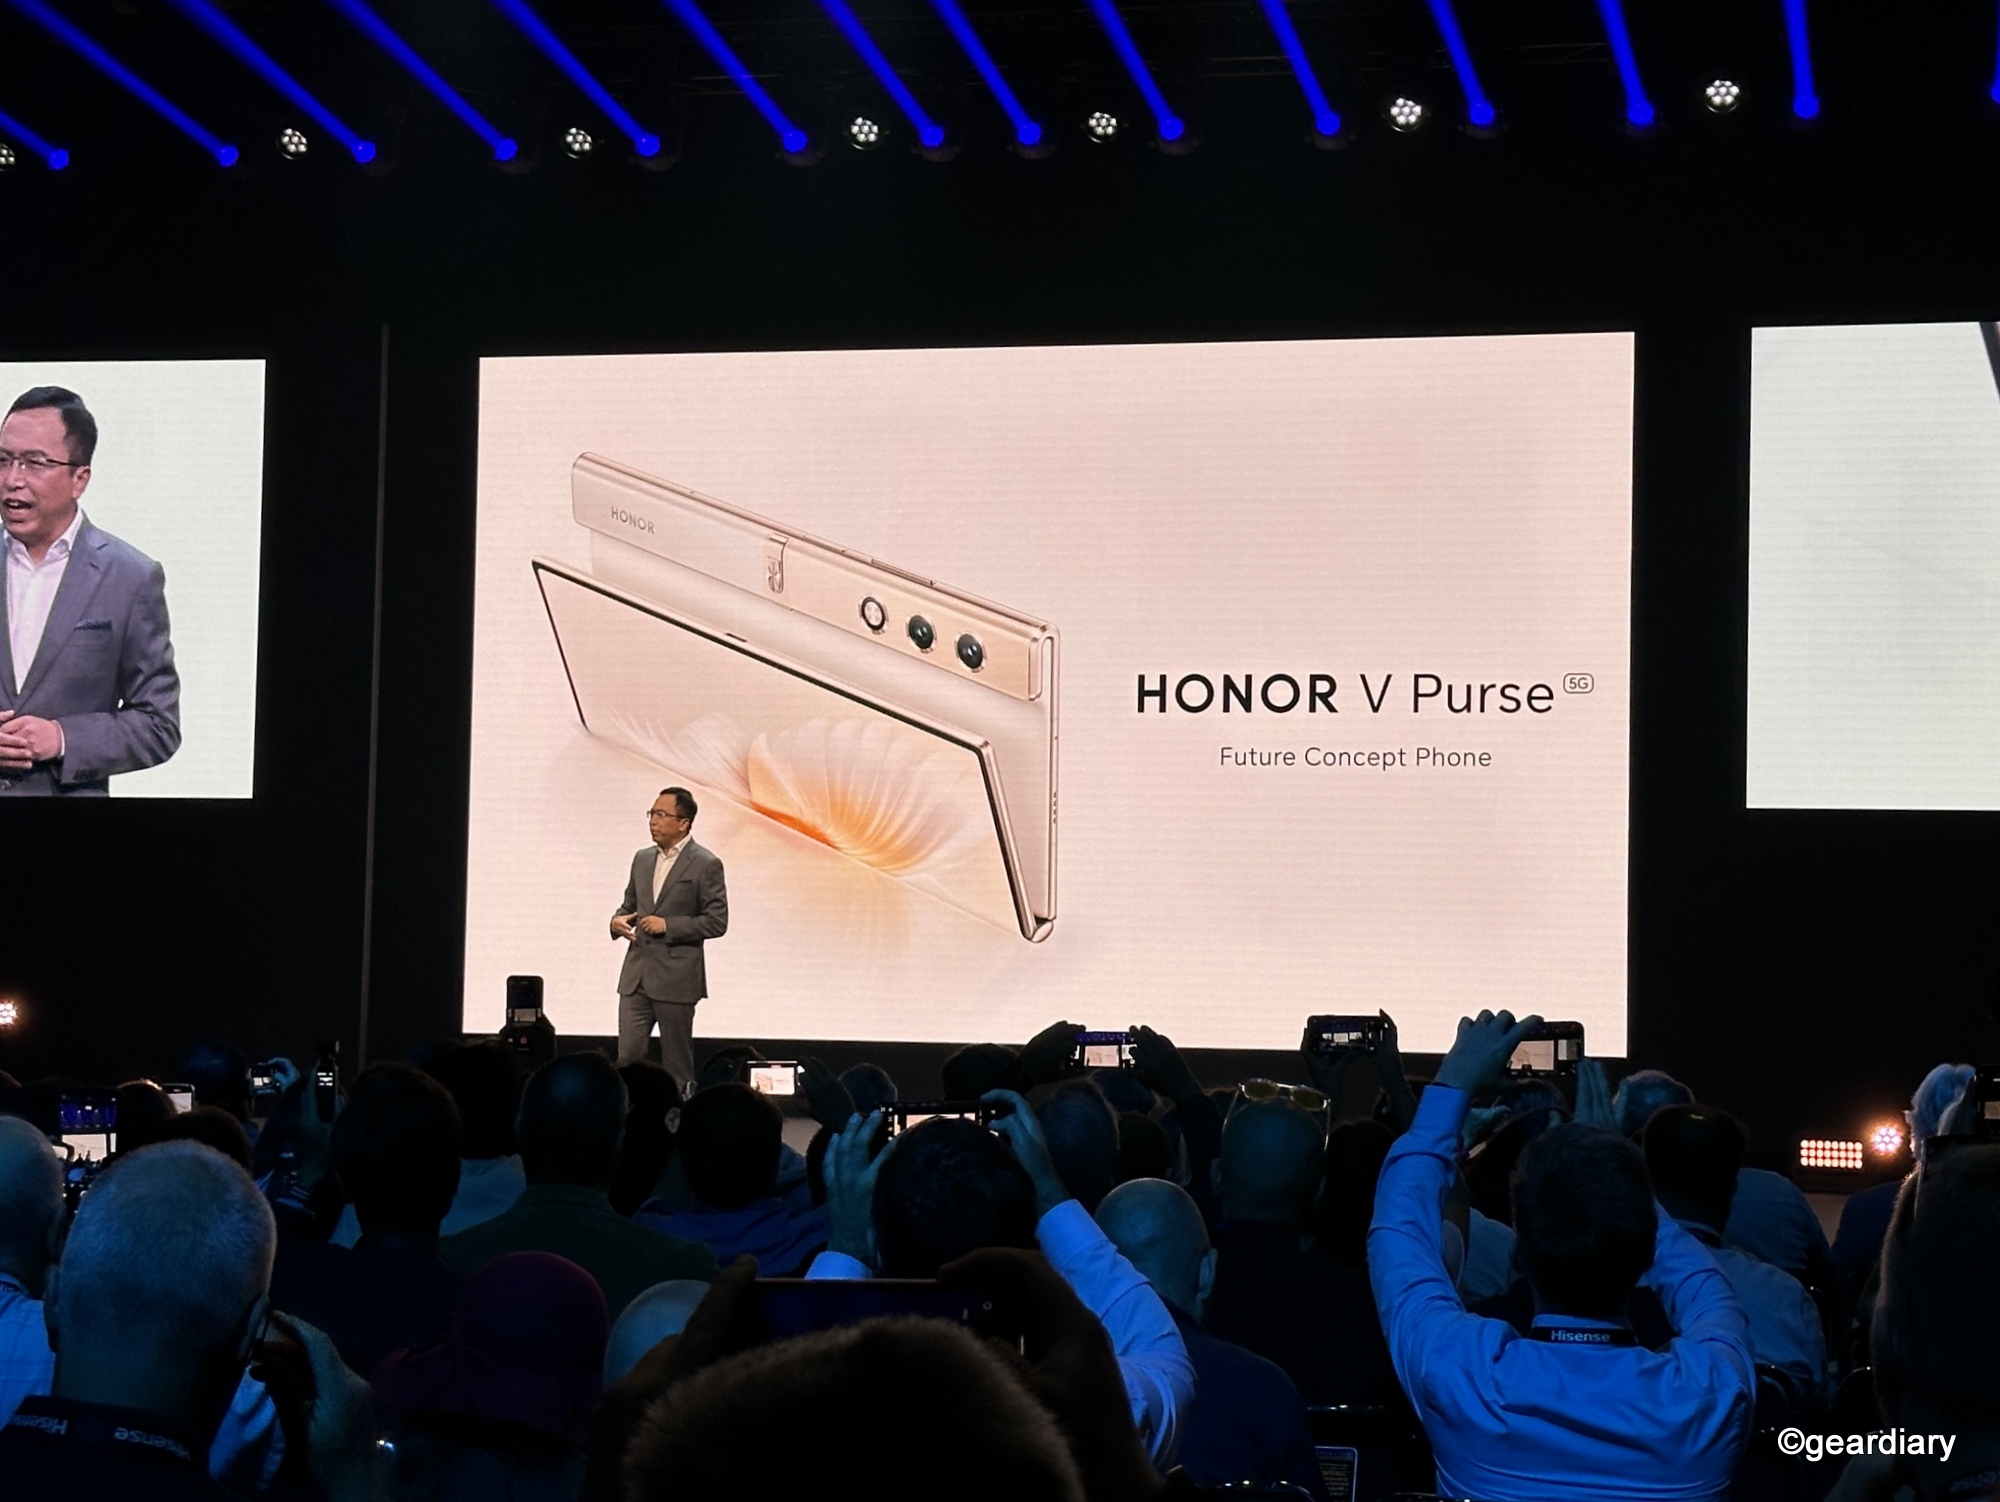 The Honor V Purse is a concept smartphone that features an outward